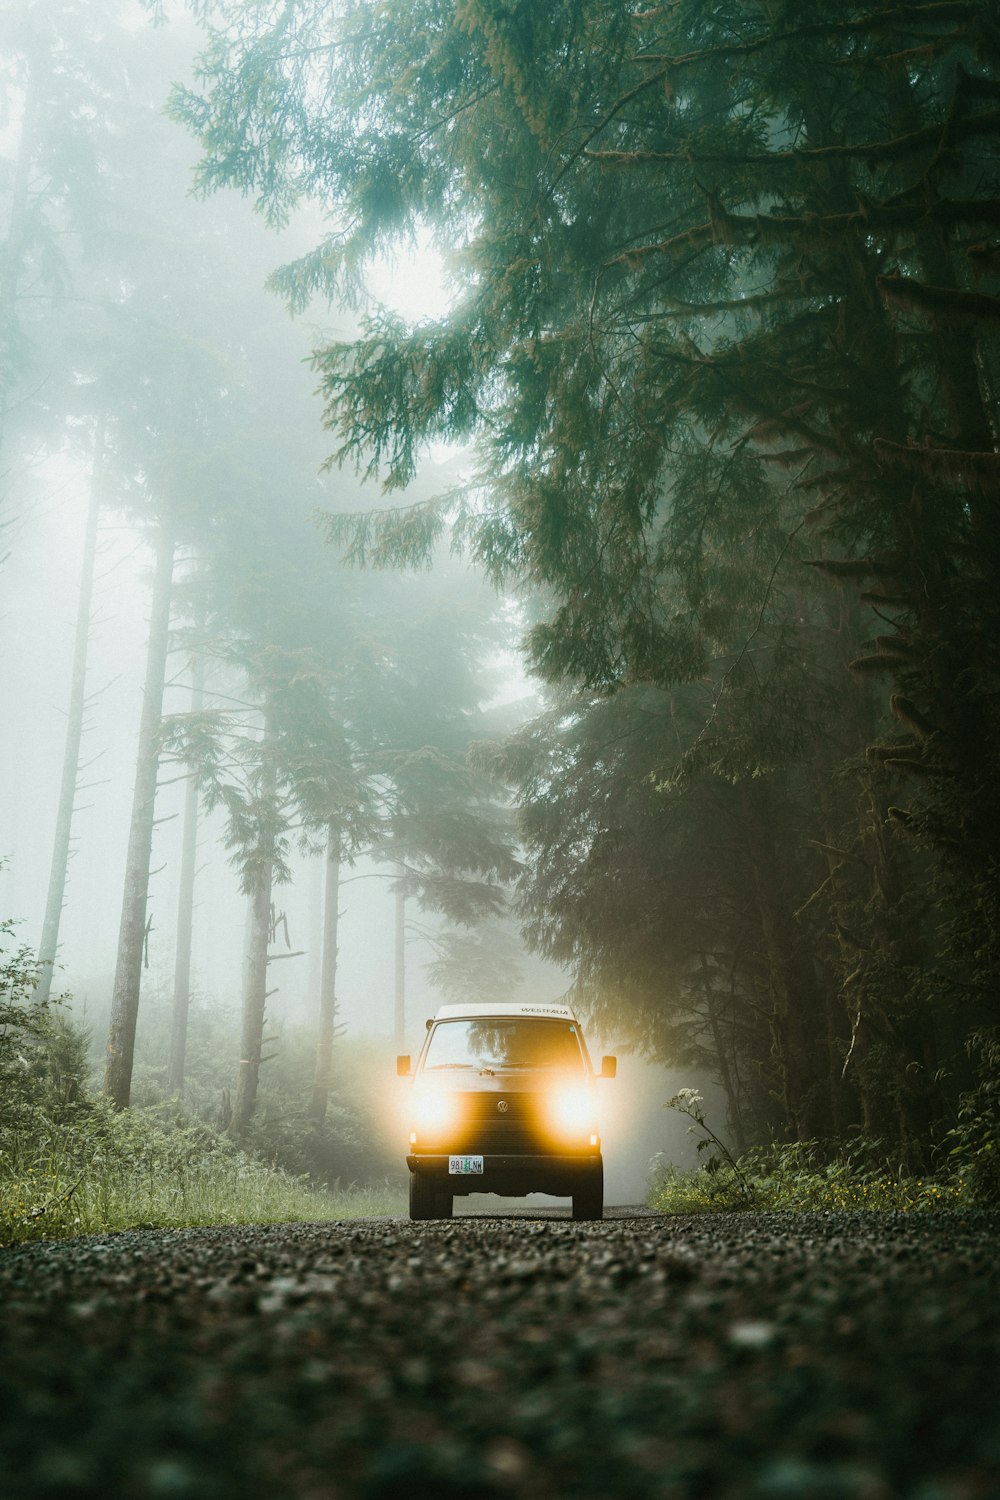 yellow car on road between trees during foggy day